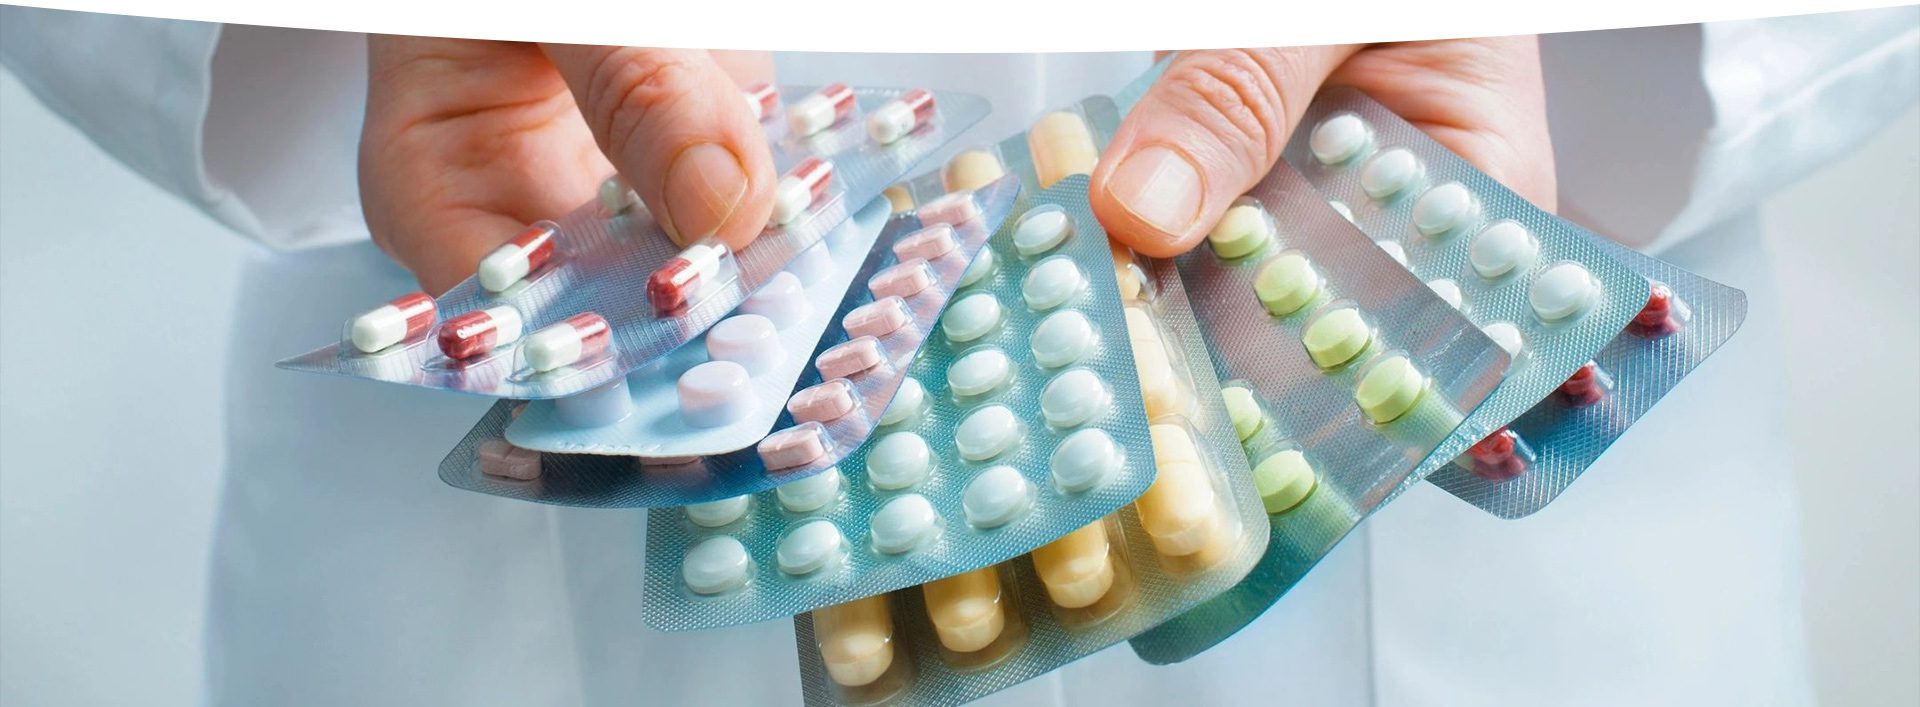 A person holding onto several different types of pills.